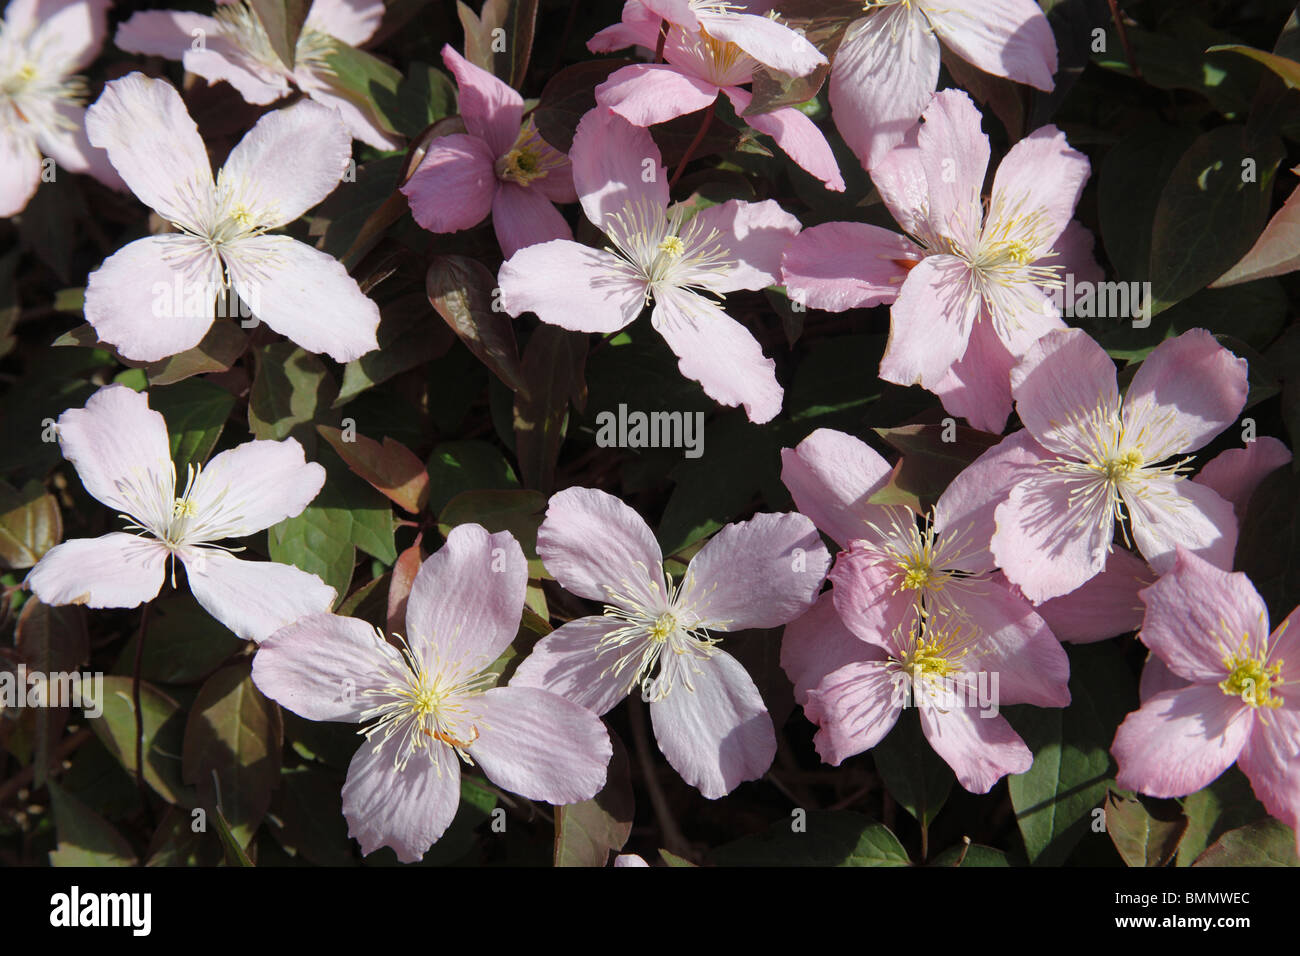 Clematis Pink perfection plant in flower Stock Photo